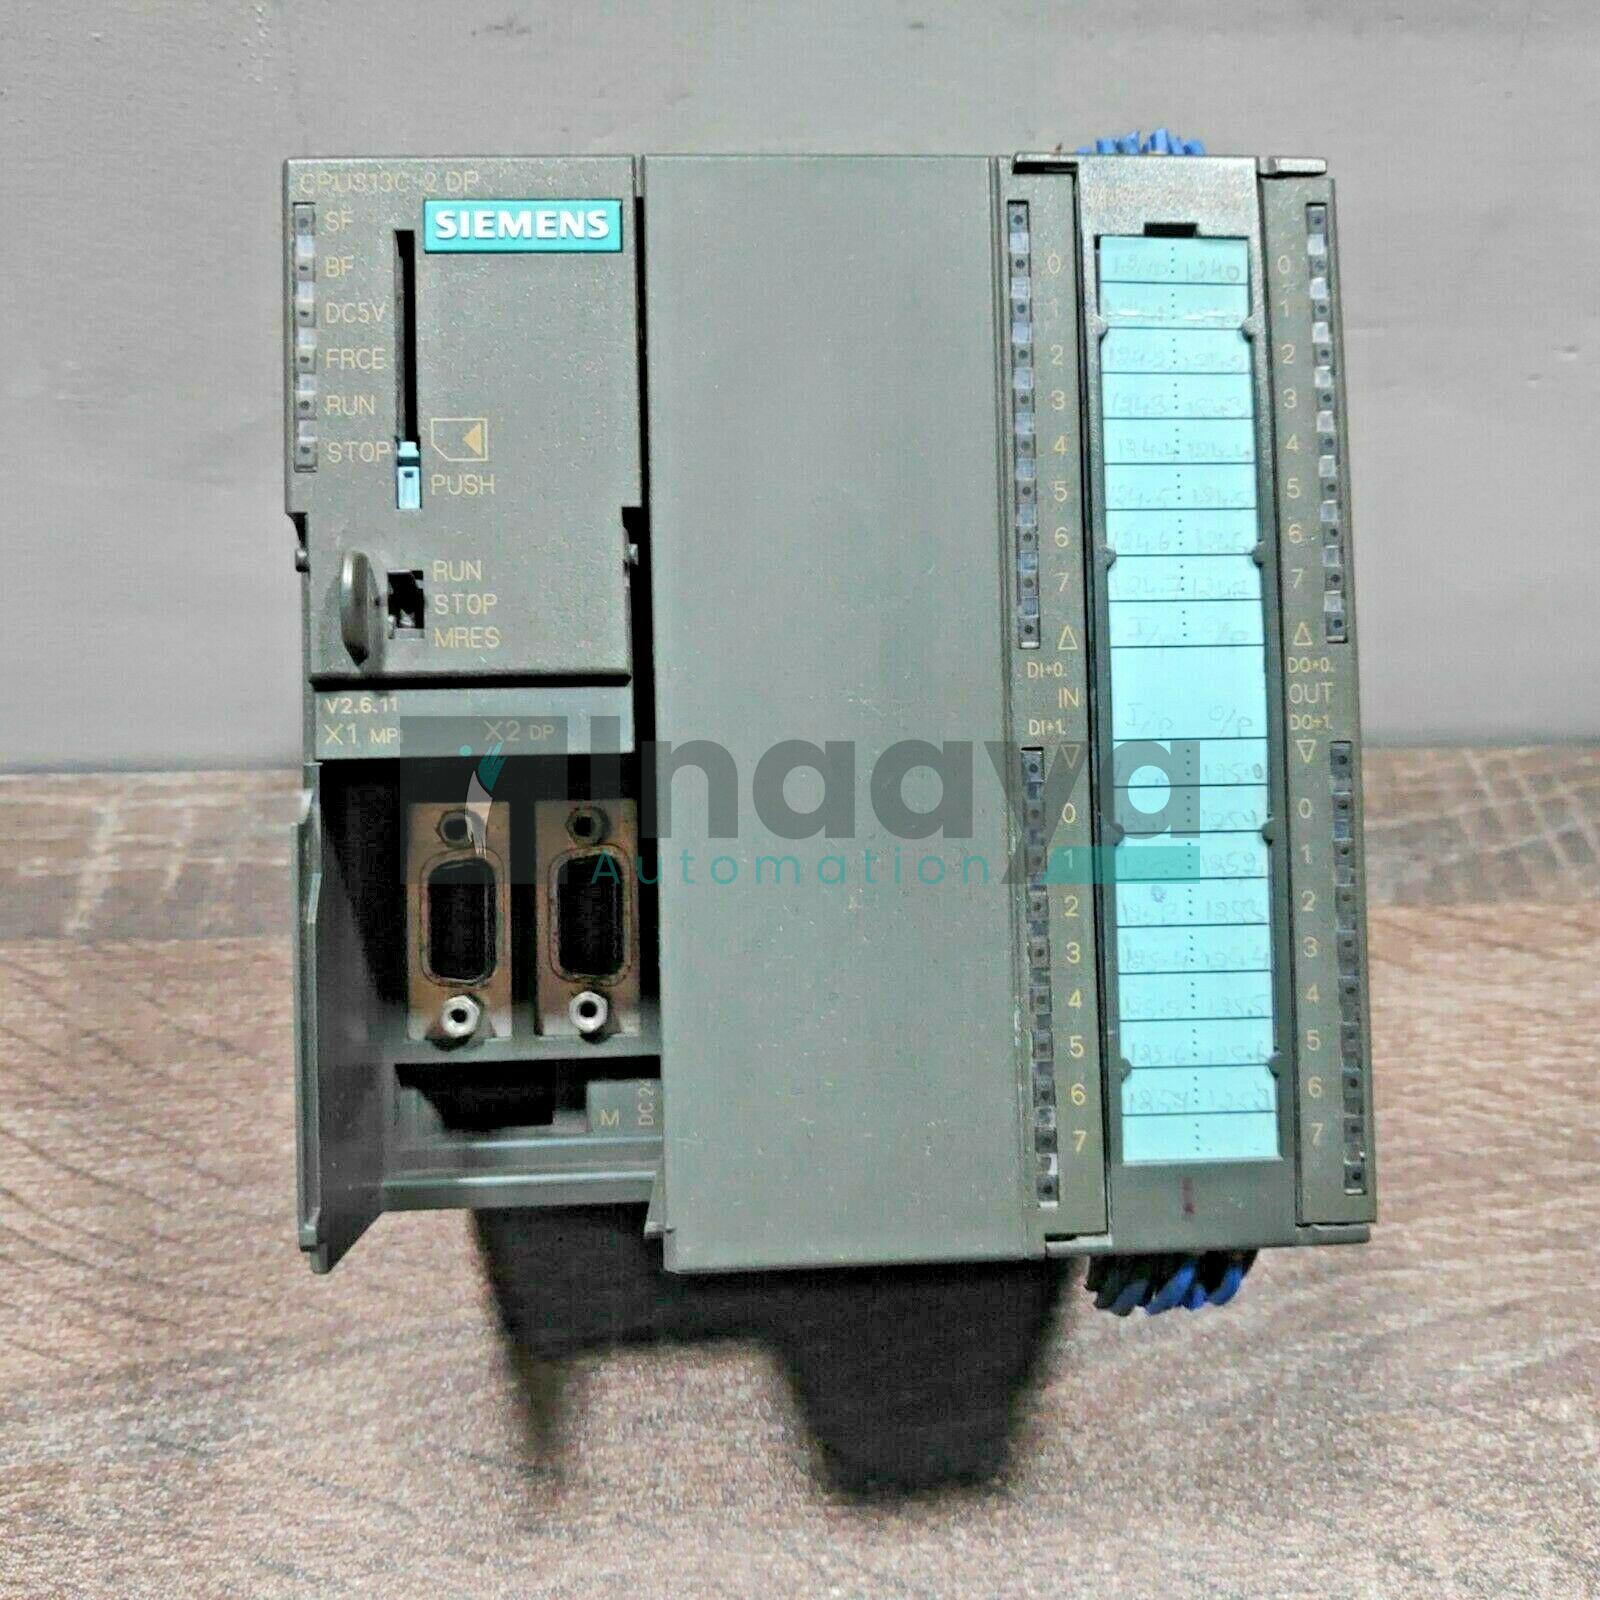 SIEMENS 6ES7313-6CF03-0AB0 S7-300 CPU313C-2 DP COMPACT CPU WITH MPI 